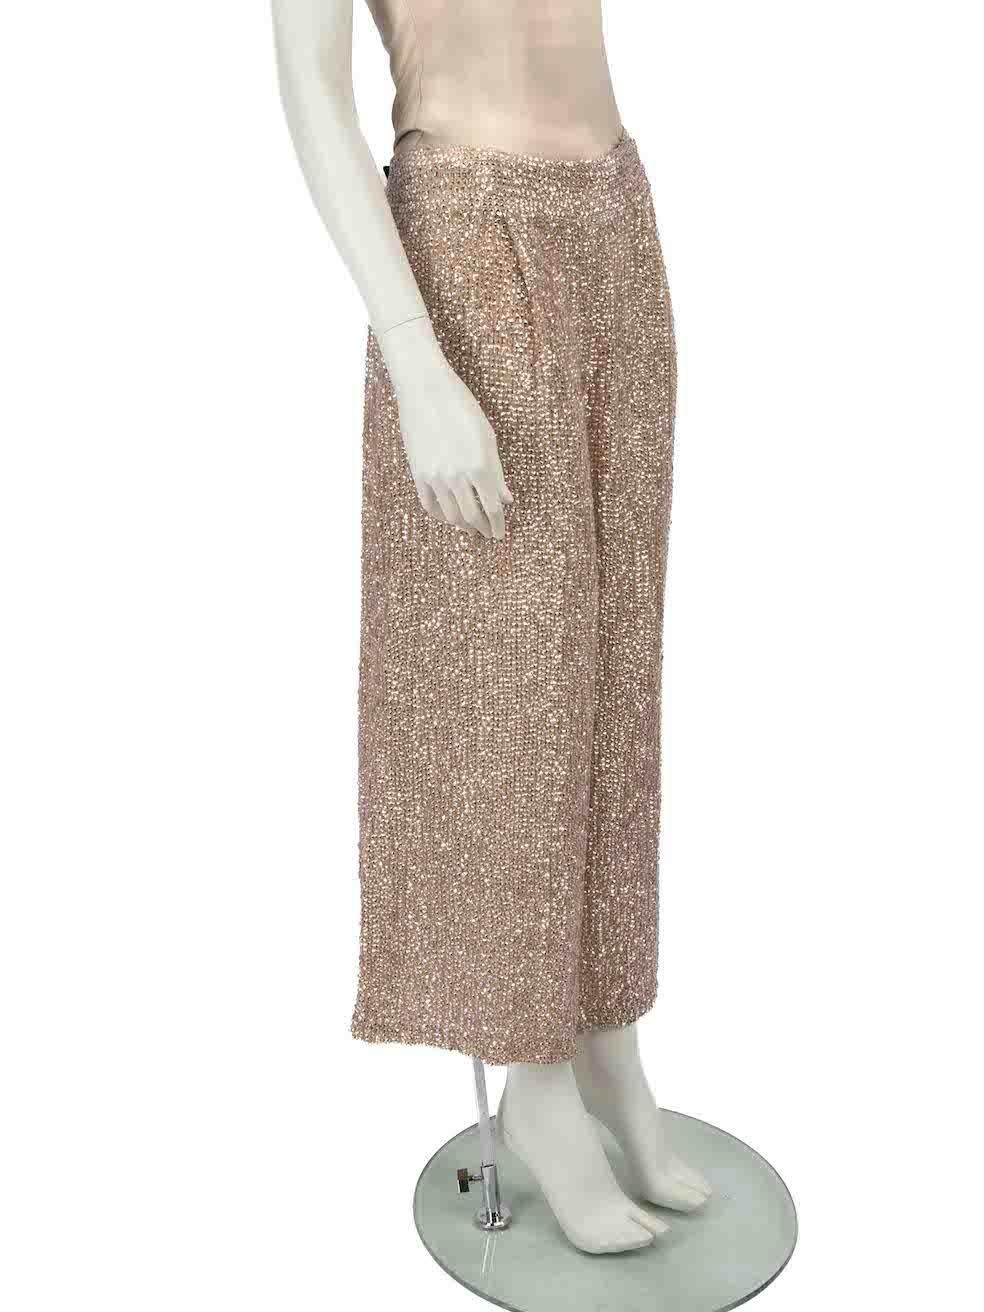 CONDITION is Very good. Minimal wear to trousers is evident. Minimal wear to the lining with slight discolouration at the waistband on this used Temperley London designer resale item.
 
 
 
 Details
 
 
 Beige
 
 Viscose
 
 Trousers
 
 Sequinned
 
